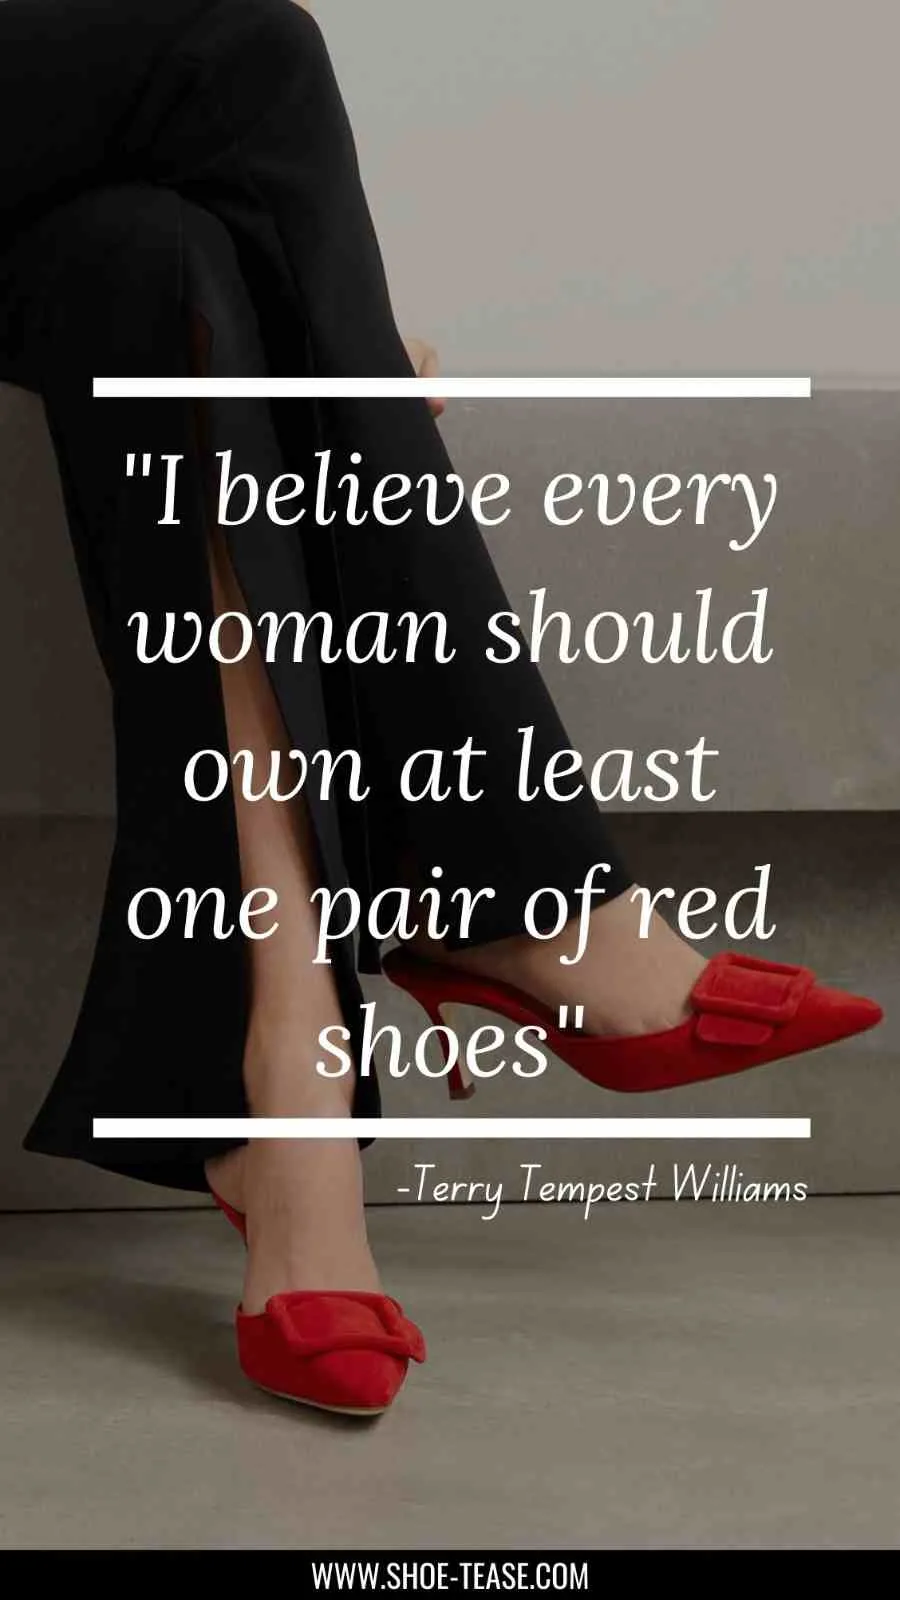 Red Shoes Quote: "I believe every woman should own at least one pair of red shoes by Terry Tempest Williams" text over woman crossing legs in pair of red pointed pumps.